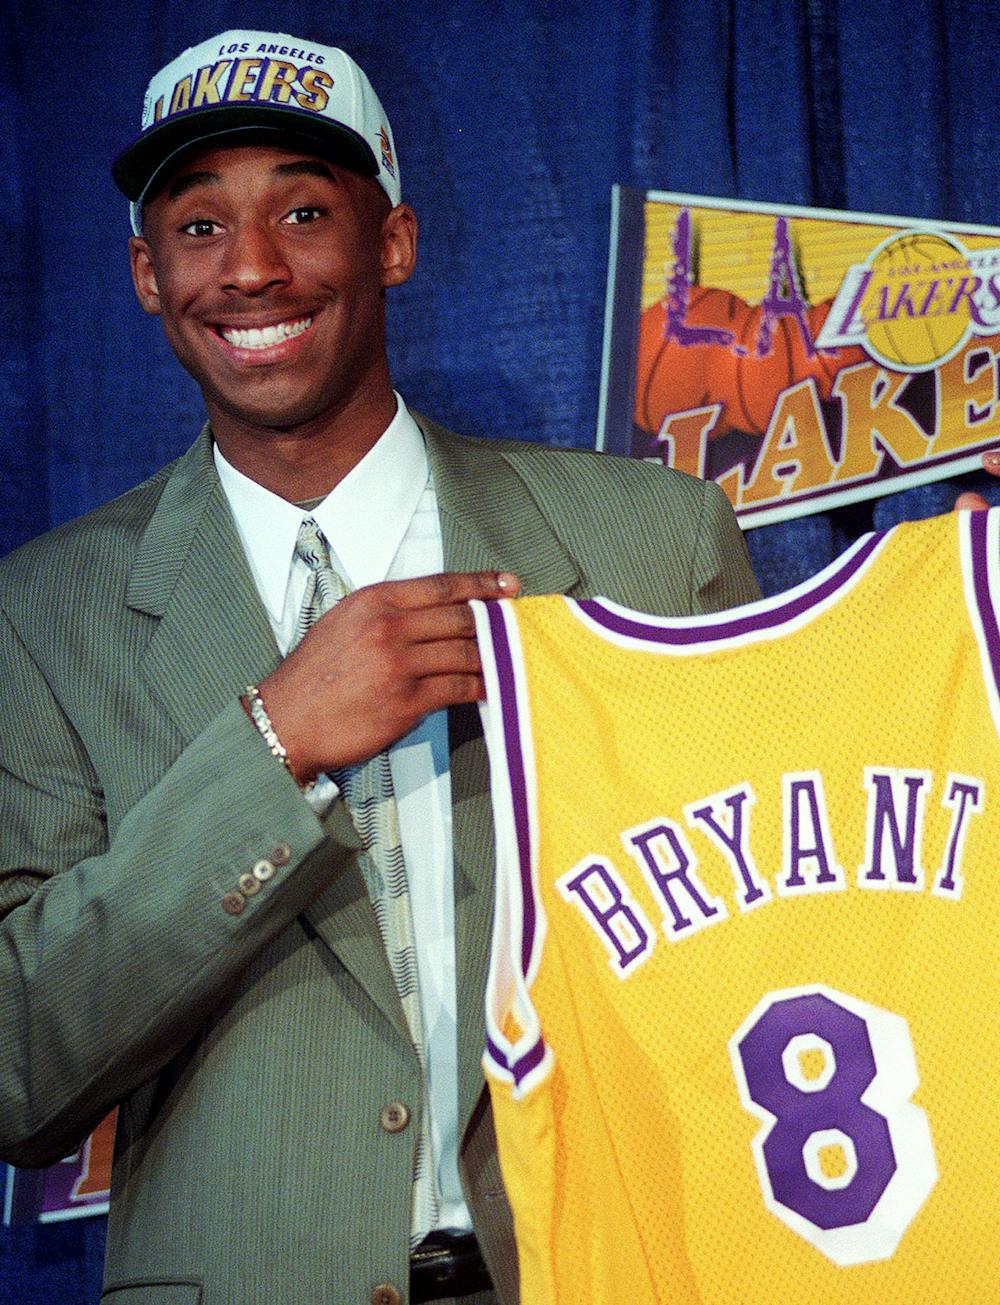 <p>FILE - In this July 12, 1996, file photo Kobe Bryant, 17, jokes with the media as he holds his Los Angeles Lakers jersey during a news conference at the Great Western Forum in Inglewood, Calif. Bryant, a five-time NBA champion and a two-time Olympic gold medalist, died in a helicopter crash in California on Sunday, Jan. 26, 2020. (AP Photo/Susan Sterner, File)</p>